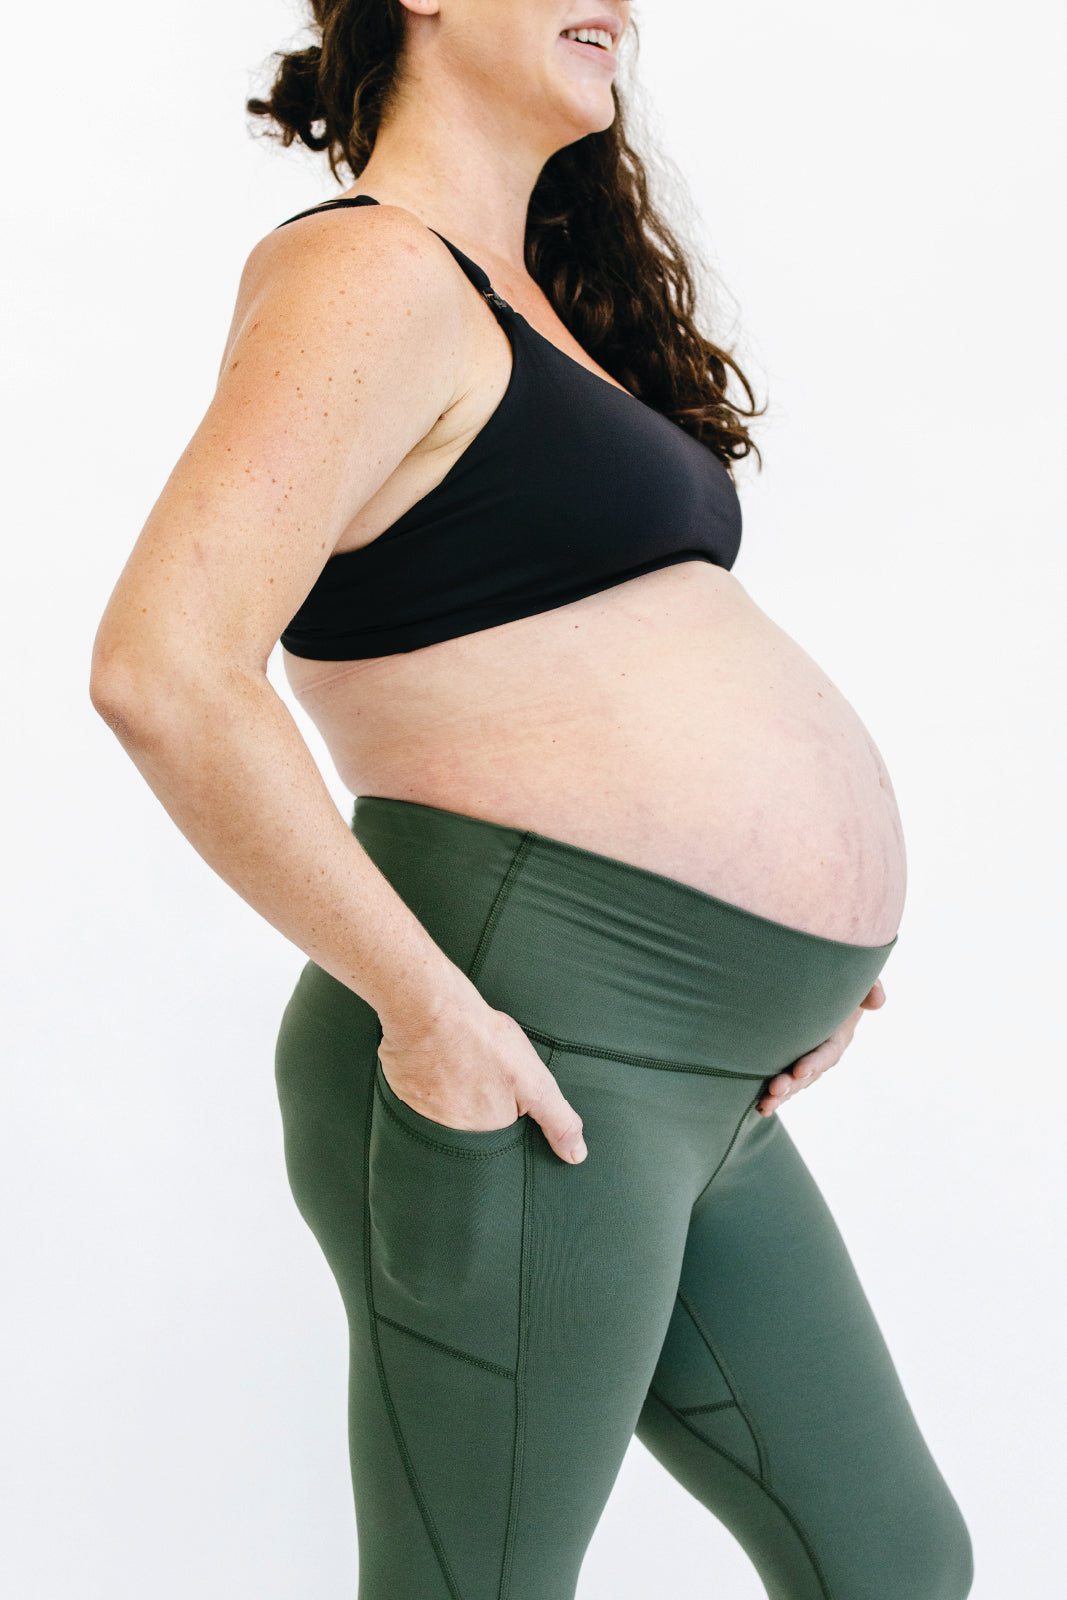 Maternity Leggings for Comfort and Style During Pregnancy – Anook Athletics